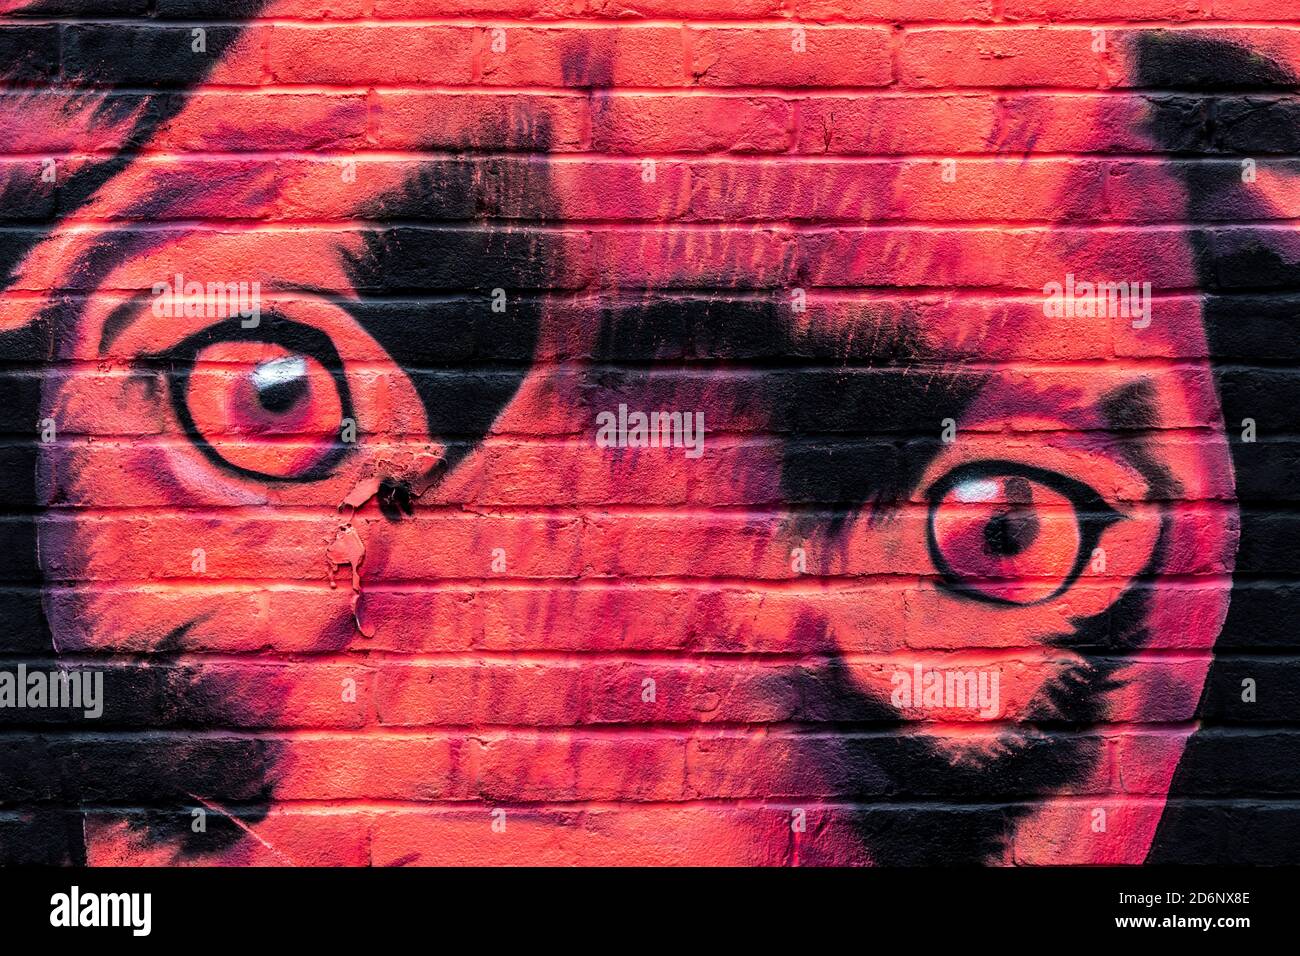 Close-up of red dog mural by street artist DS in Shoreditch, East London, UK Stock Photo